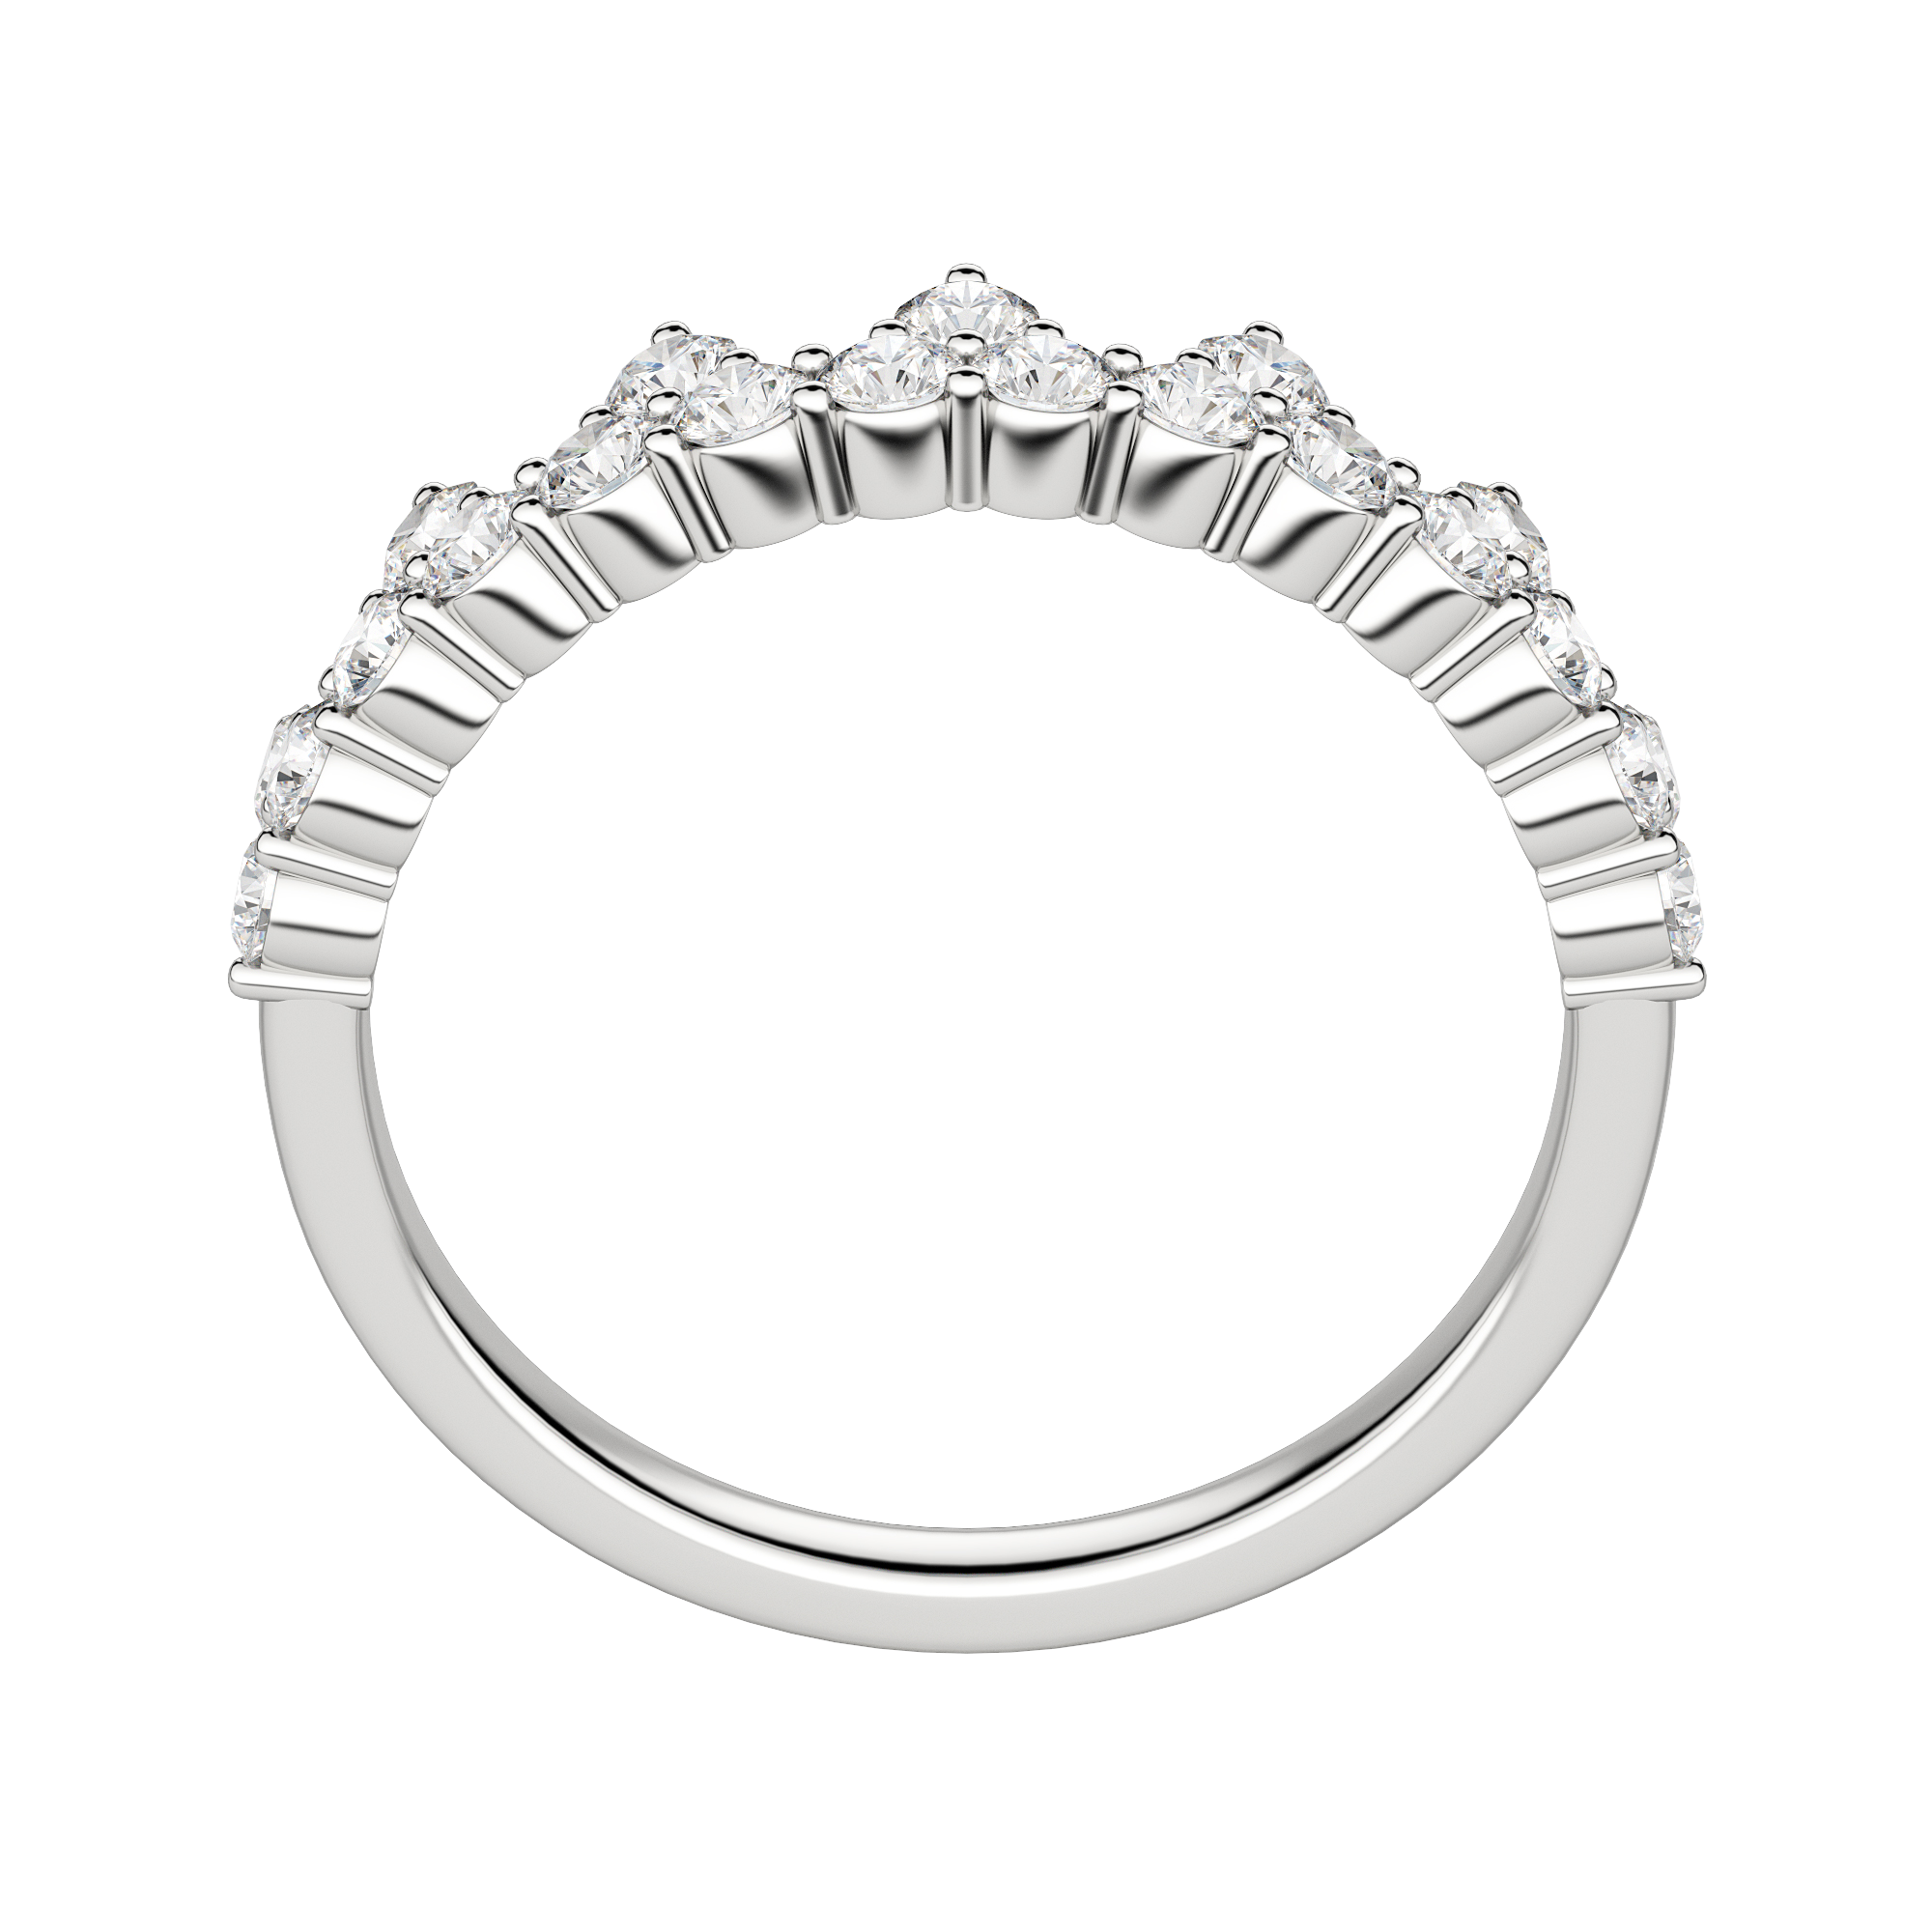 Crown Wedding Band, Hover, 14K White Gold, 